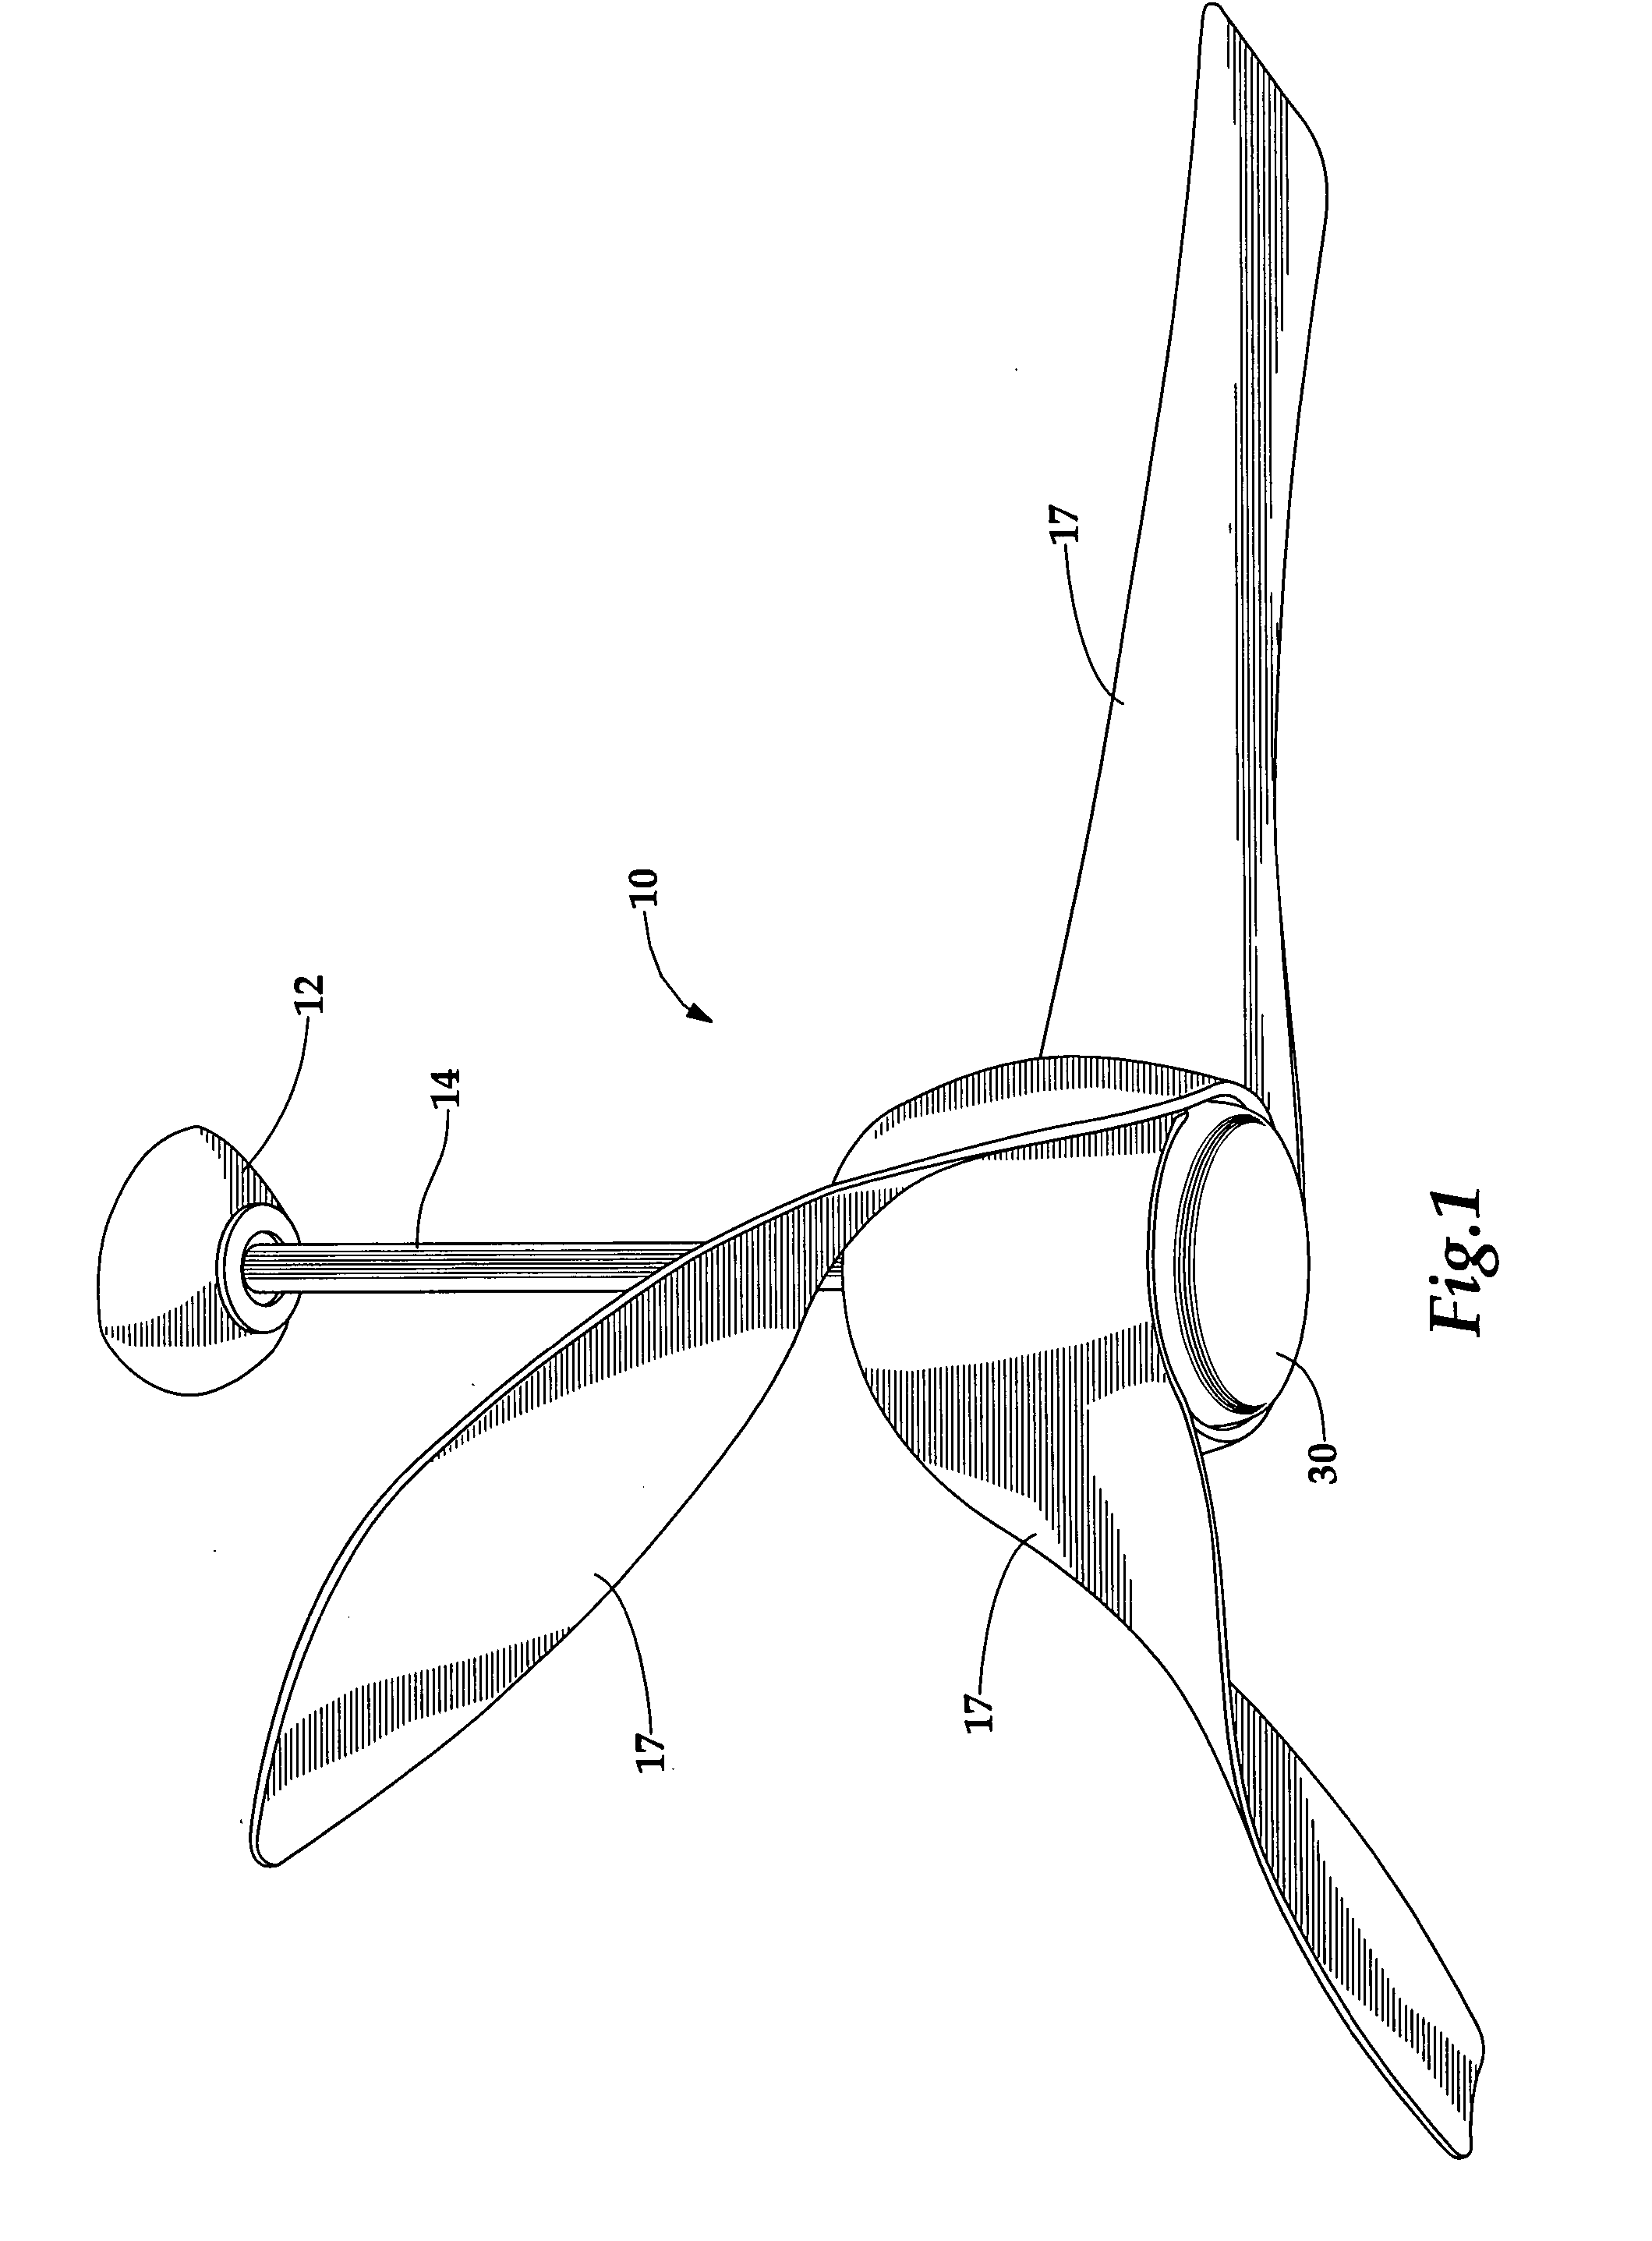 Ceiling fan with integrated fan blades and housing